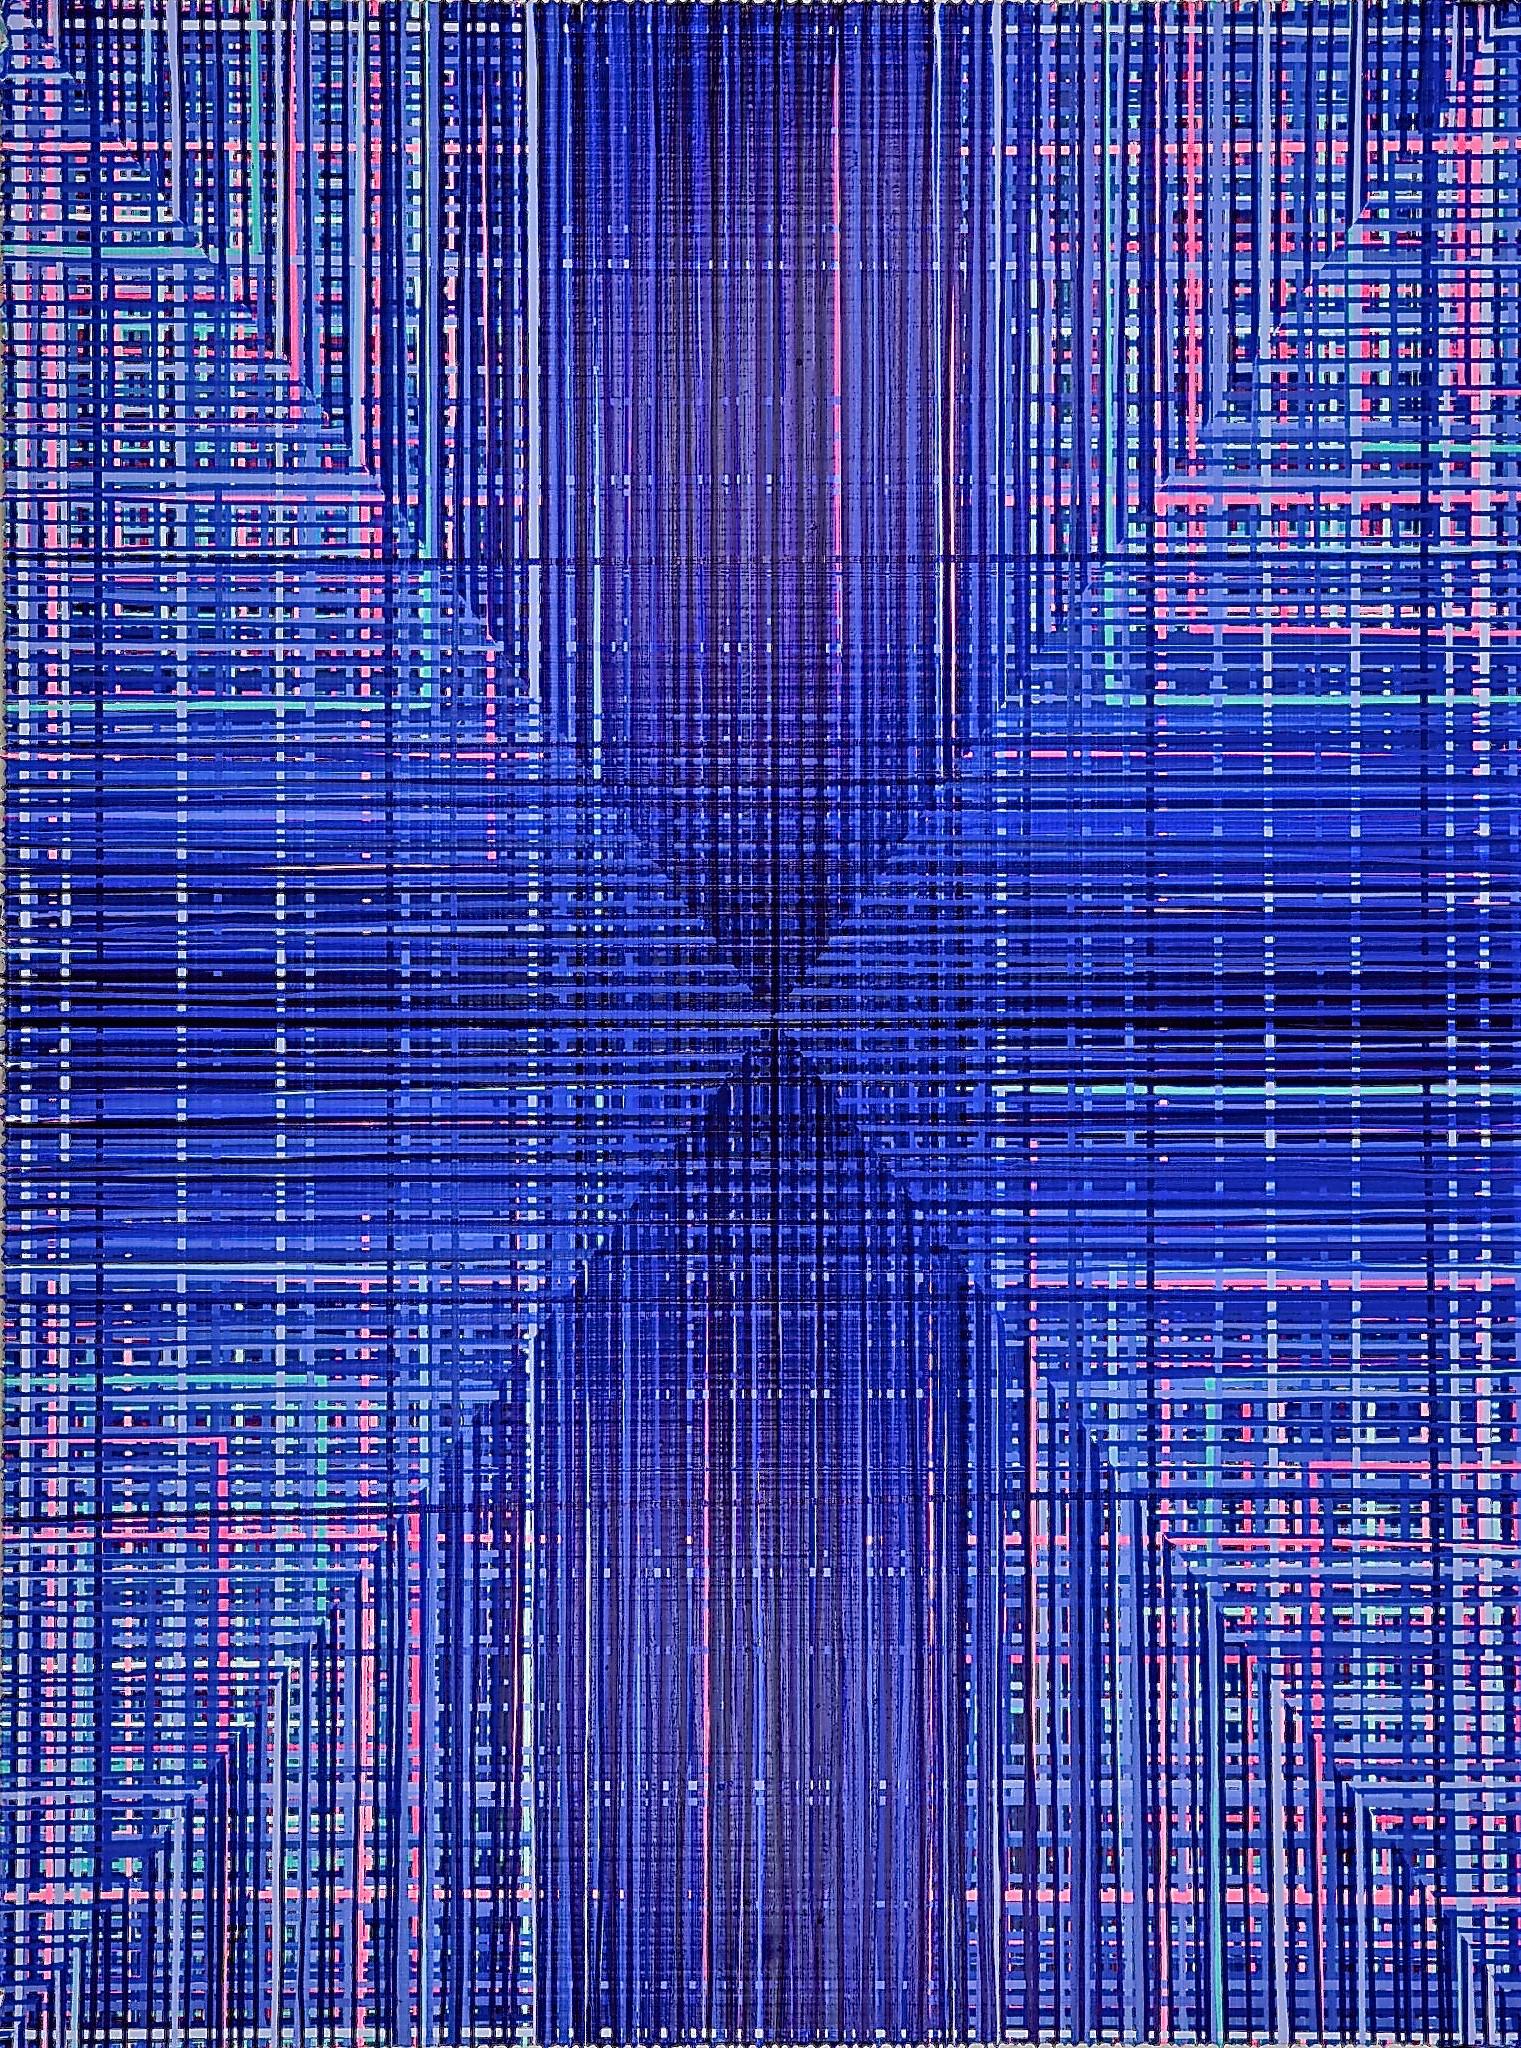 "Heroico Caeruleum"
72 x 96 in. 

Utilizing gravity to drip bright blue paint creating an illusion of depth due to the repetitive dripping method. Abstract acrylic artwork by Jon James.


See our shipping policies. For quotes, please contact us.